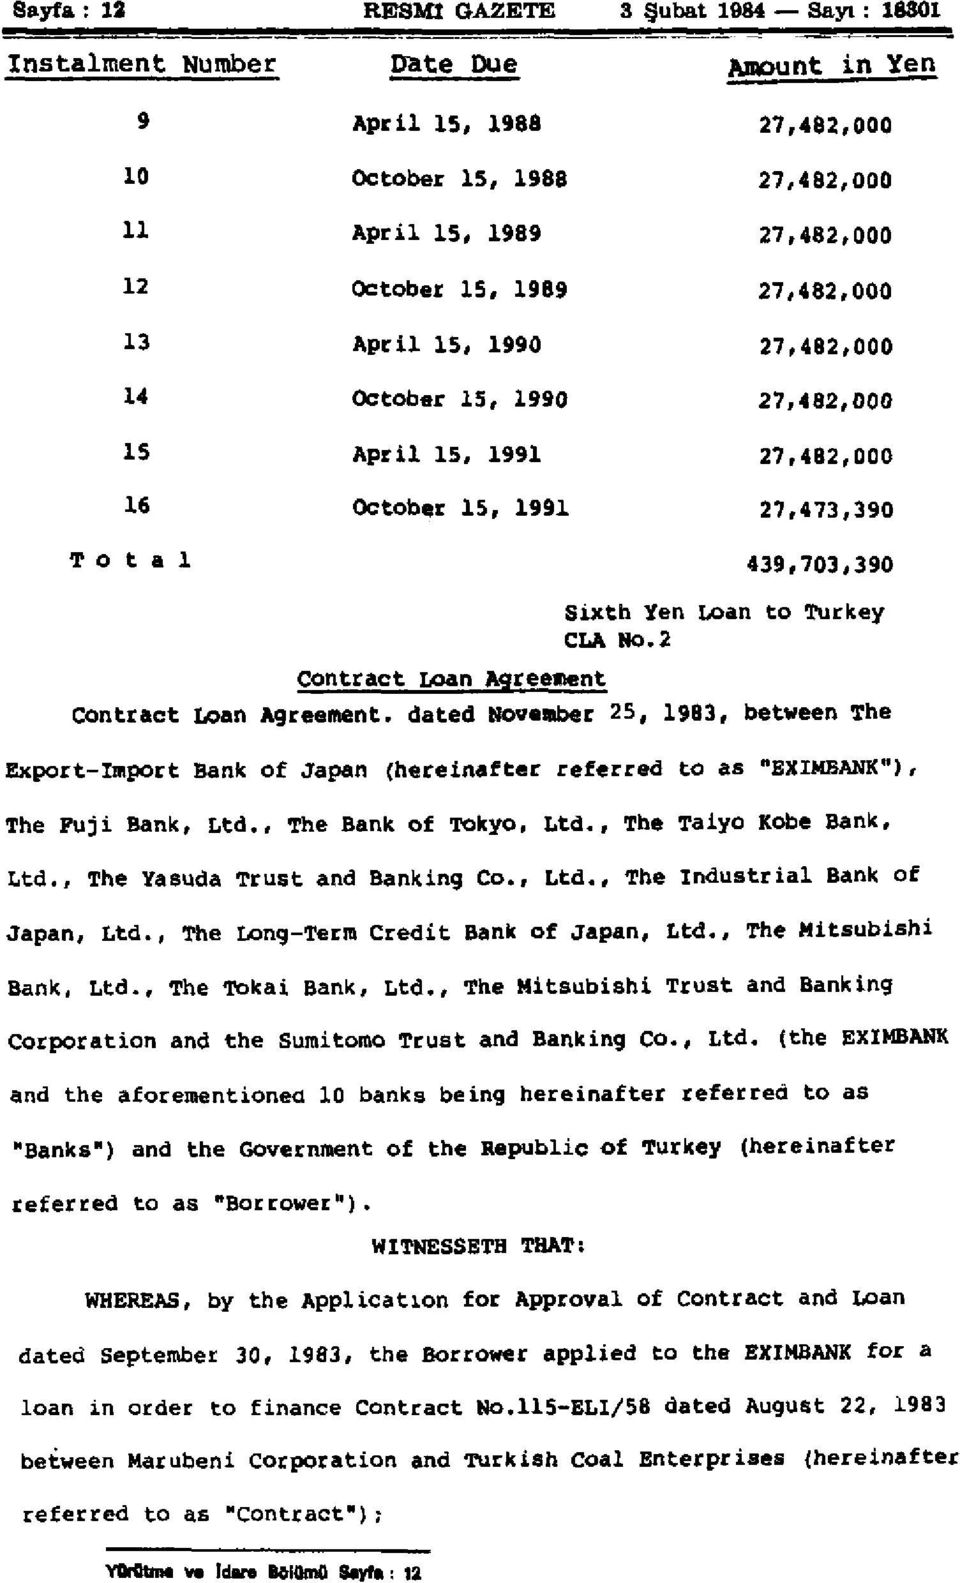 2 Turkey Contract Loan Agreement Contract Loan Agreement, dated November 25, 1983, between The Export-Import Bank of Japan (hereinafter referred to as "EXIMBANK"), The Fuji Bank, Ltd.